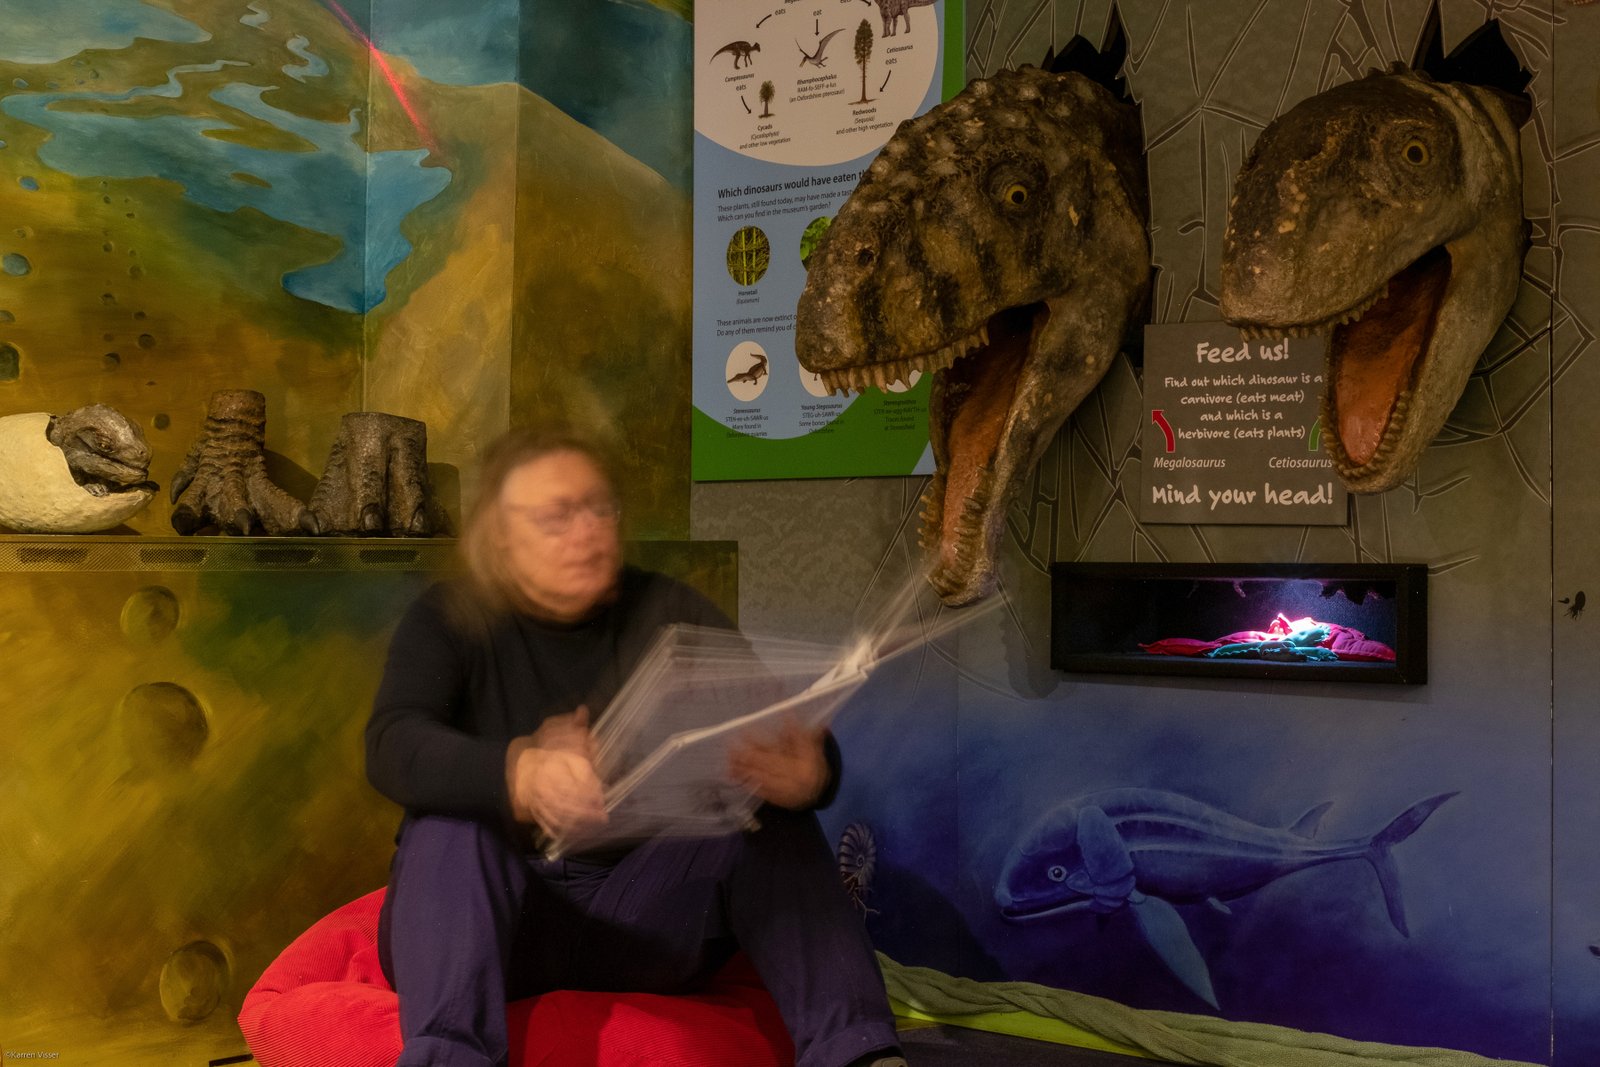 Overlooked by two dinosaur heads on the wall a white woman sits on a beanbag reading a large book.